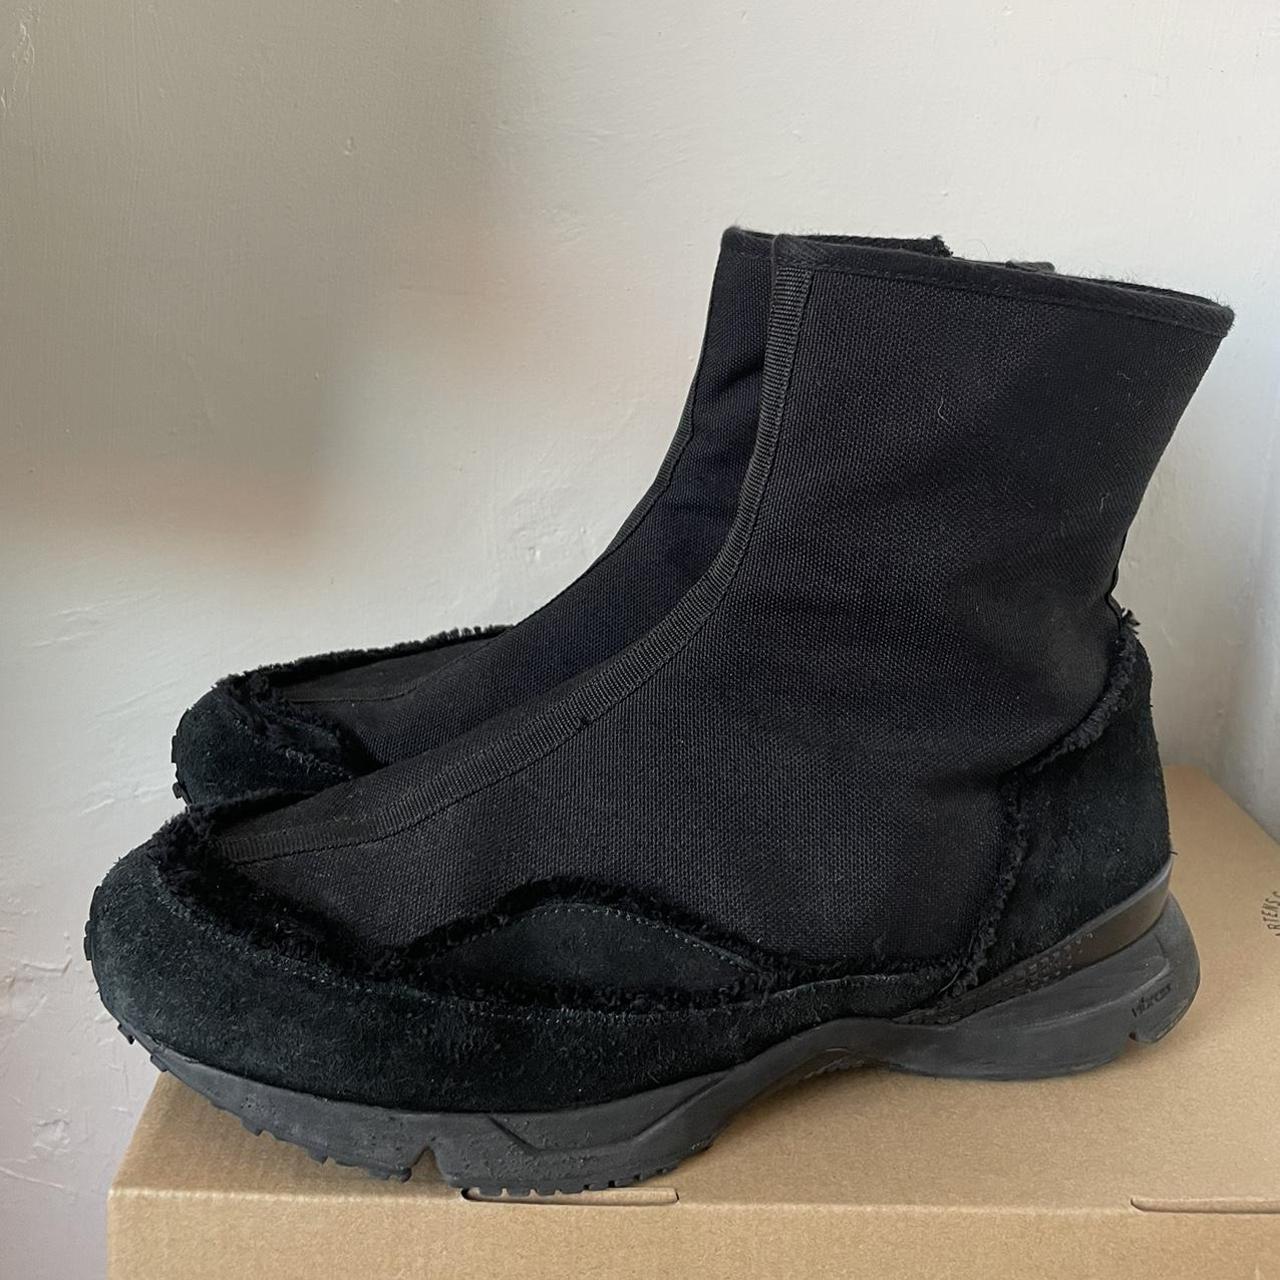 Rare Damir Doma boots. Woven and leather upper,